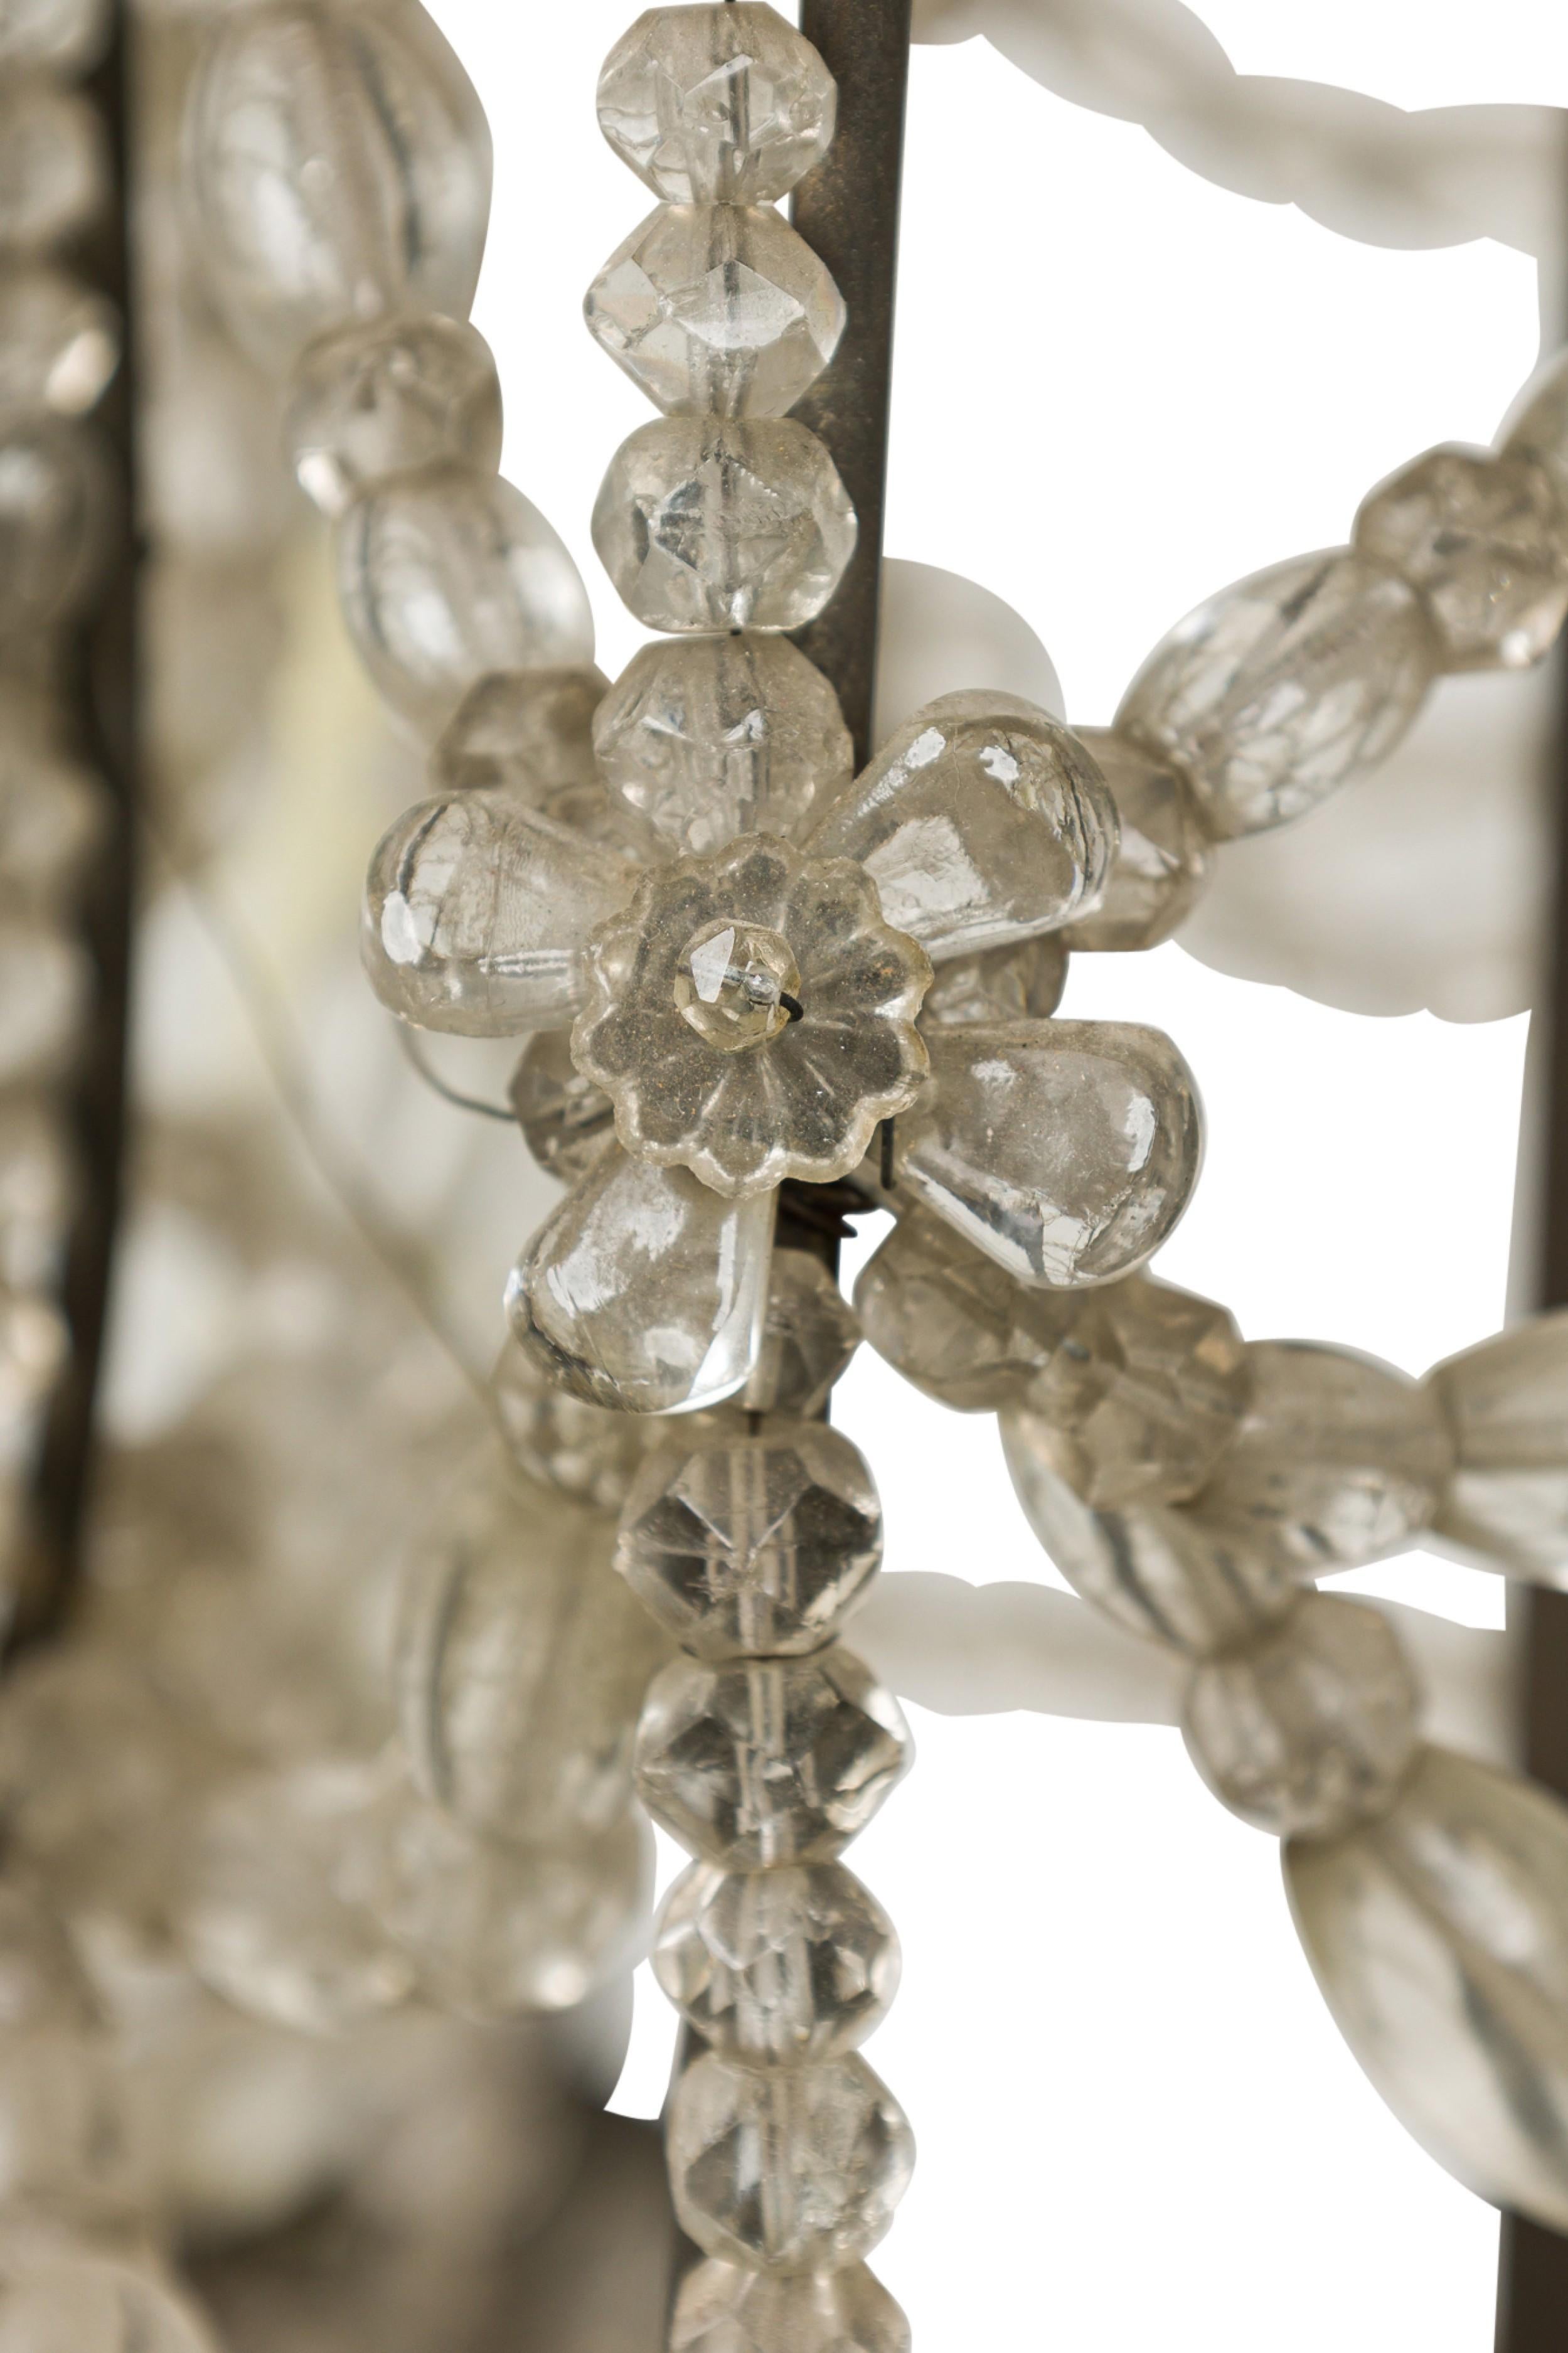 Metal Swedish Neo-Classic Early 19th Century Crystal Chandelier For Sale